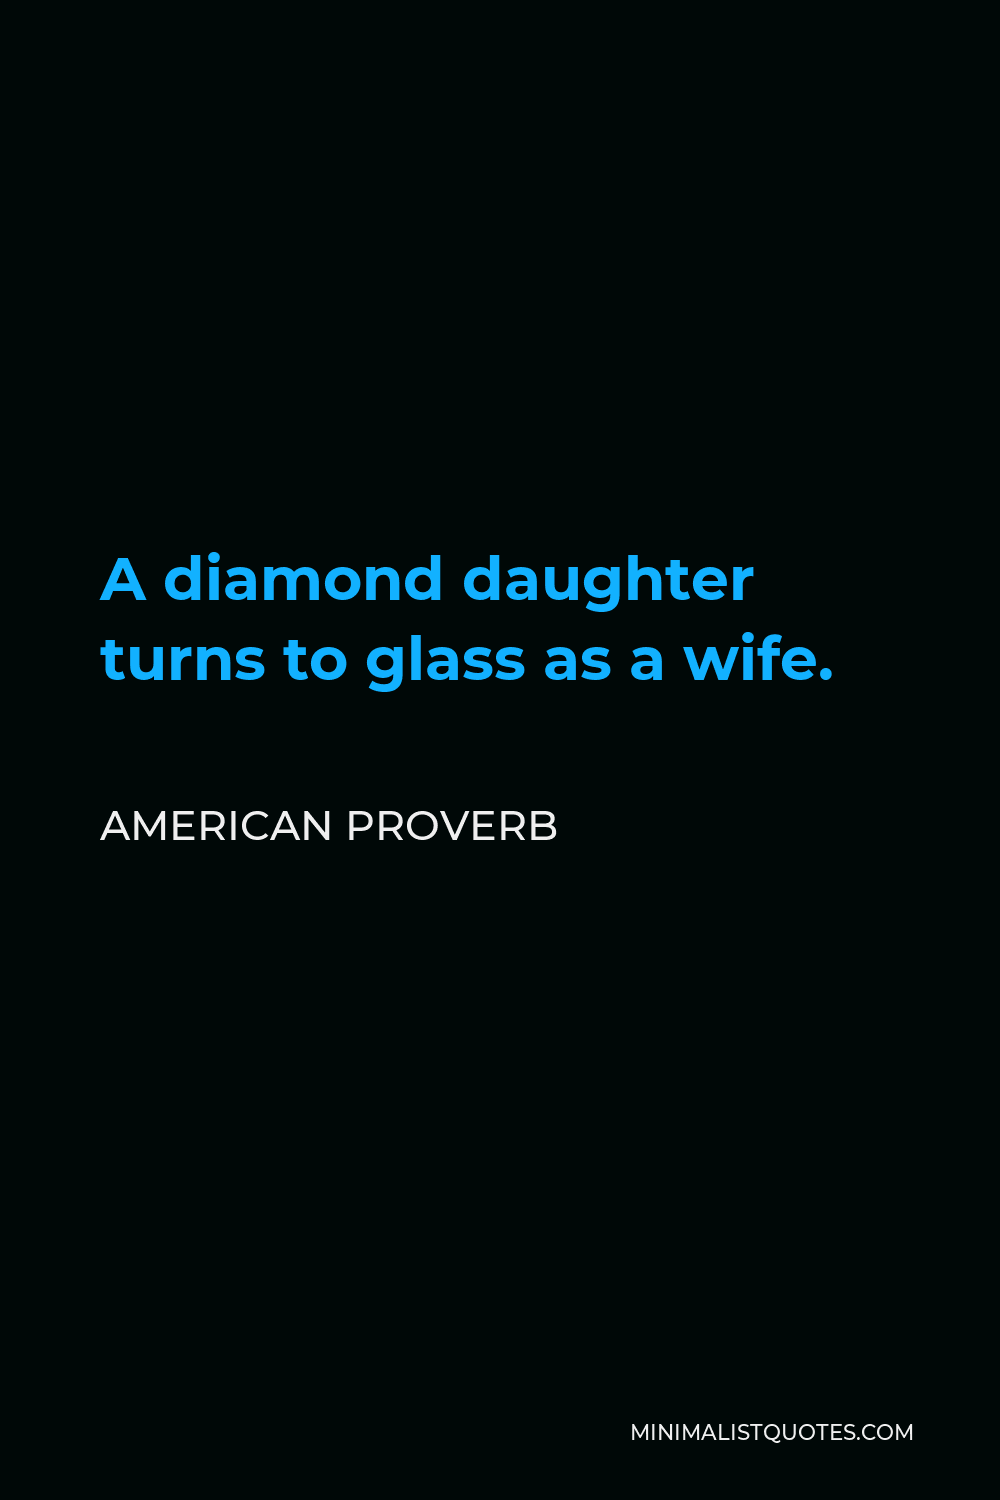 American Proverb Quote - A diamond daughter turns to glass as a wife.